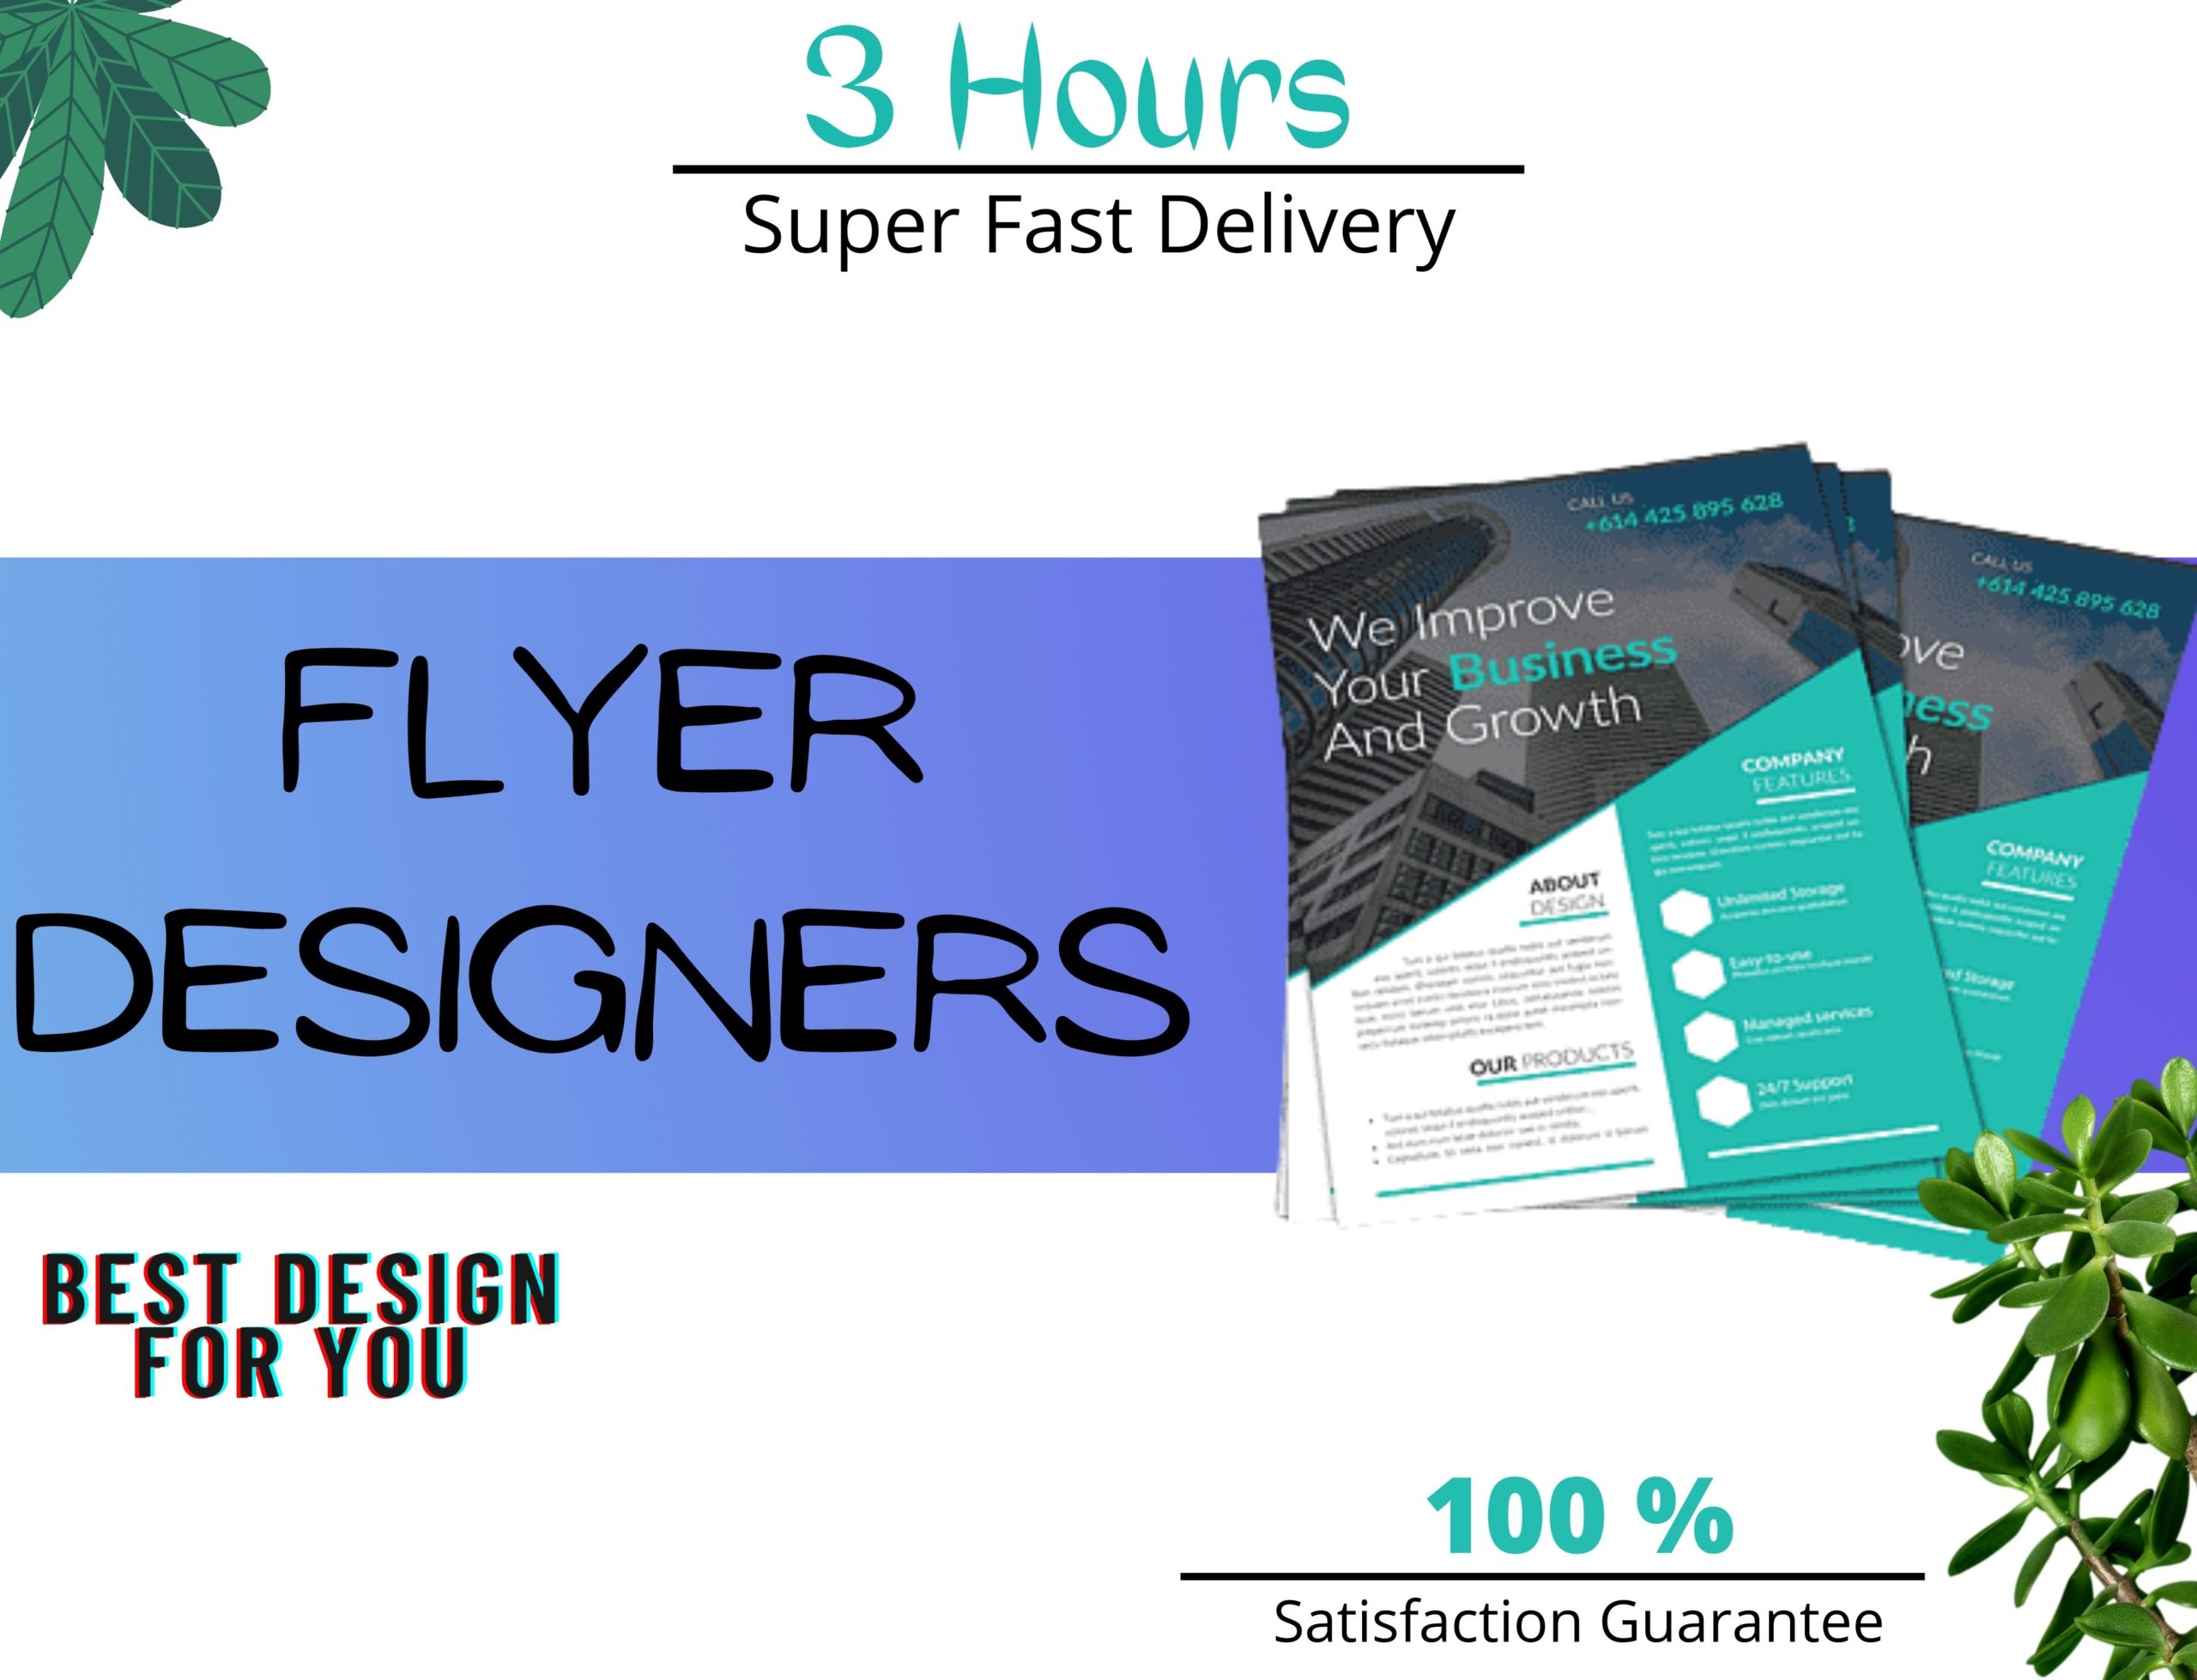 52447develop custom flyers and brochures as well as logo and t shirt design for you